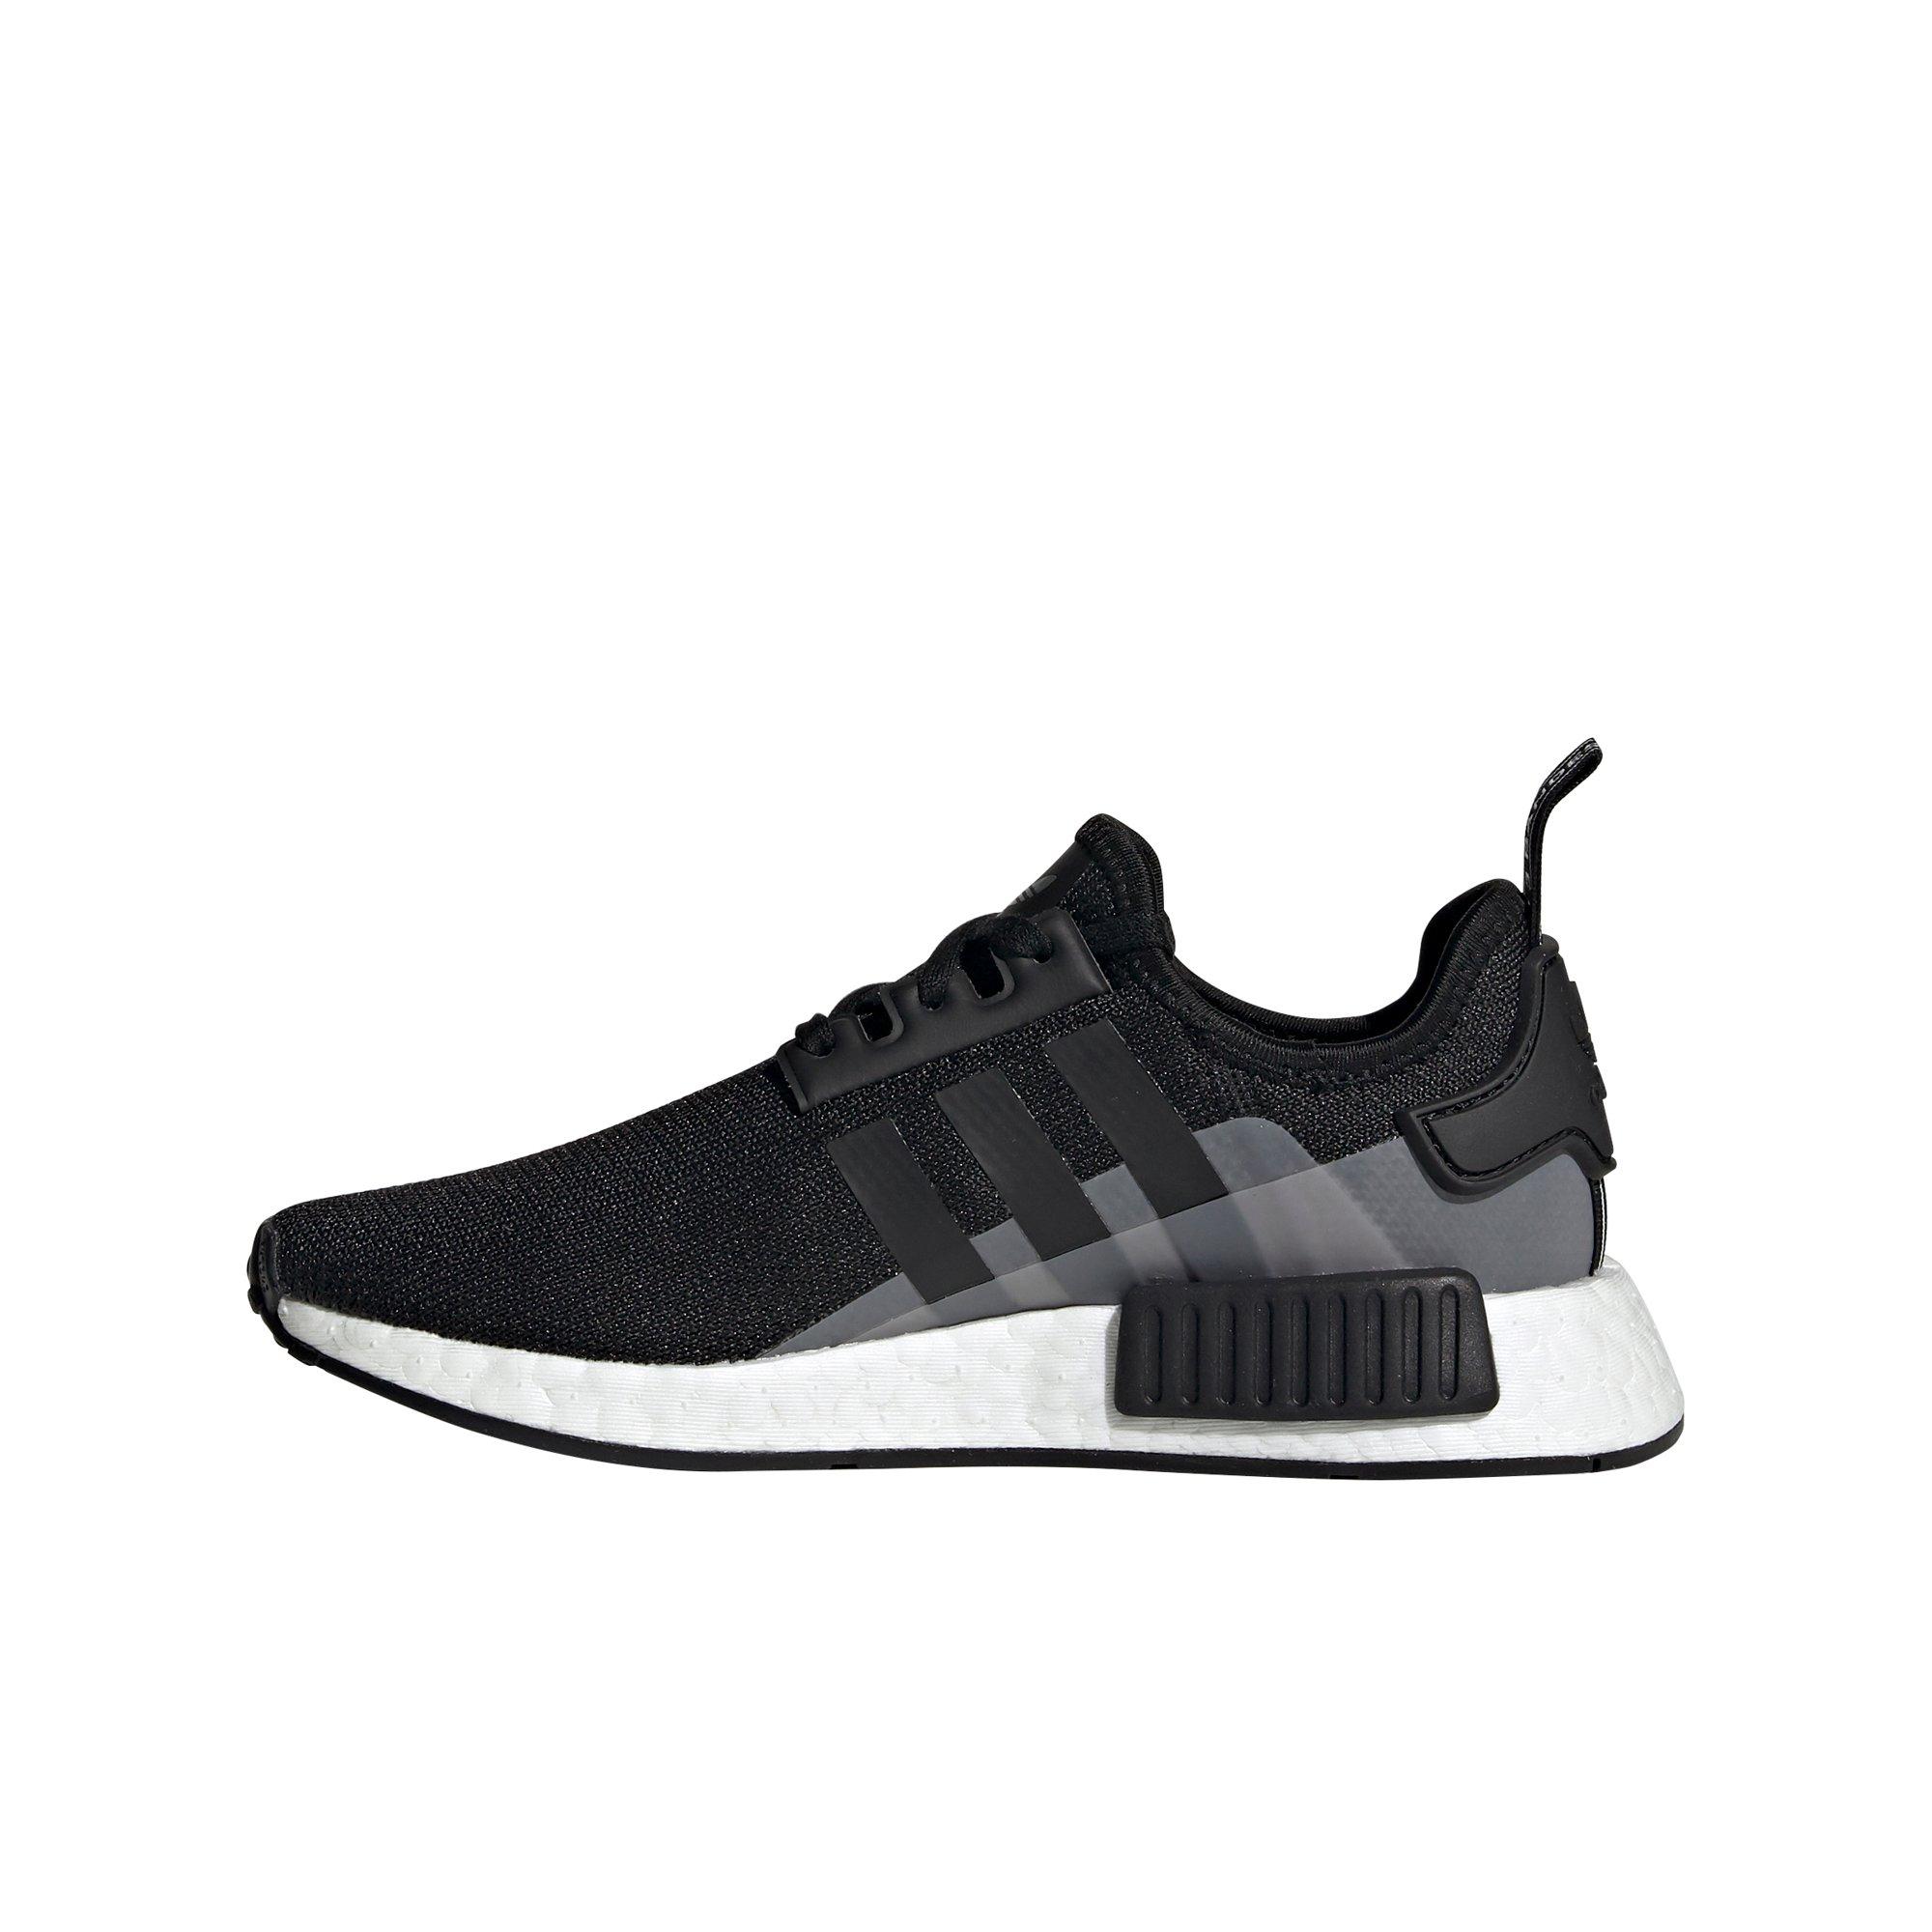 adidas NMD R1 Athletic Shoes Size 125 for Men for sale on ebay